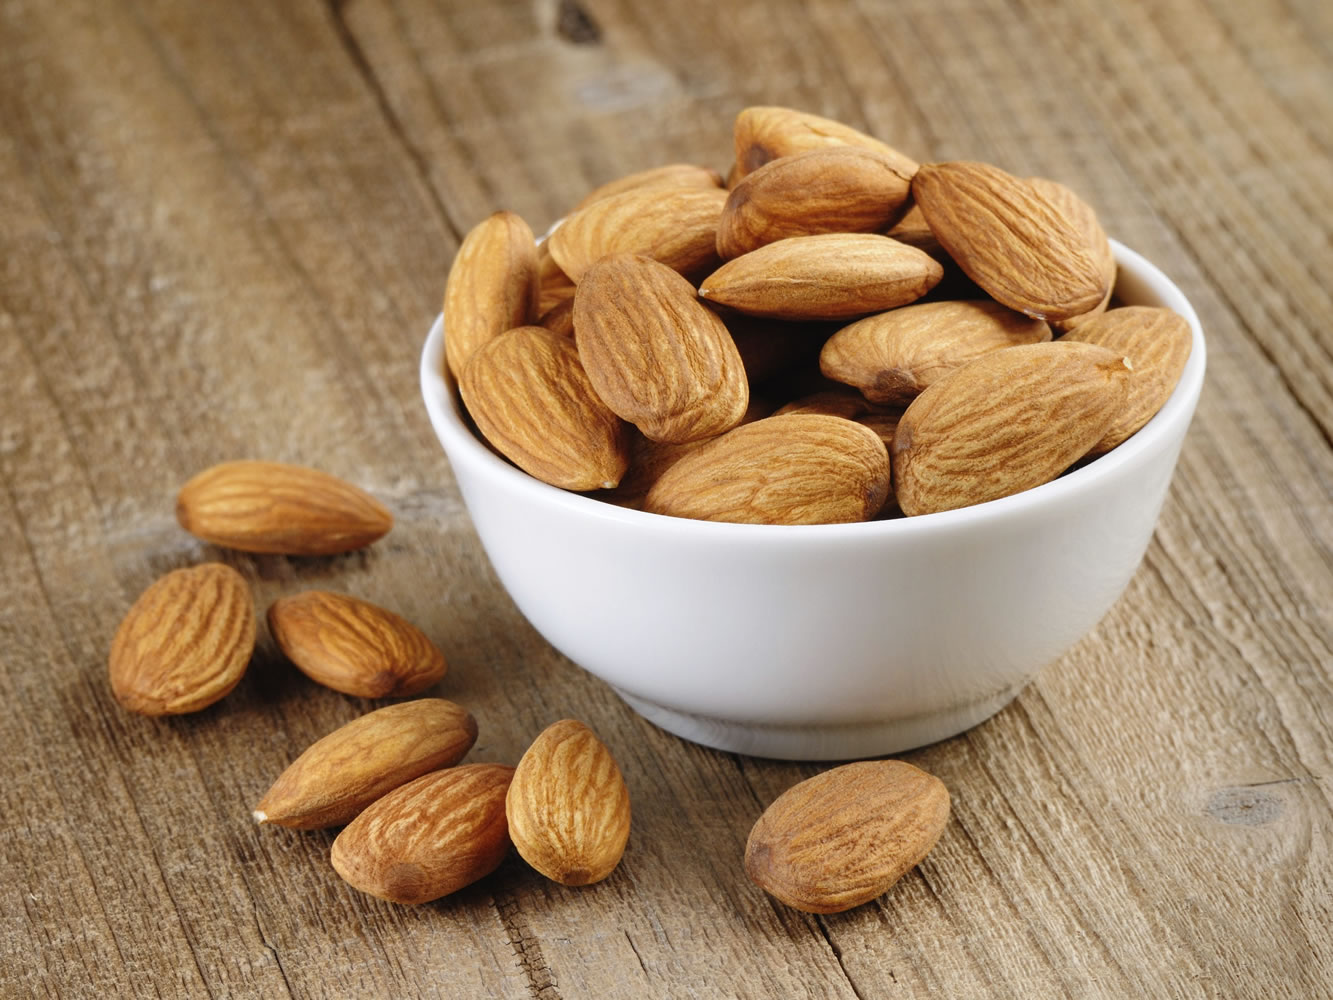 Almonds recently overtook peanuts as the most consumed nut in America.